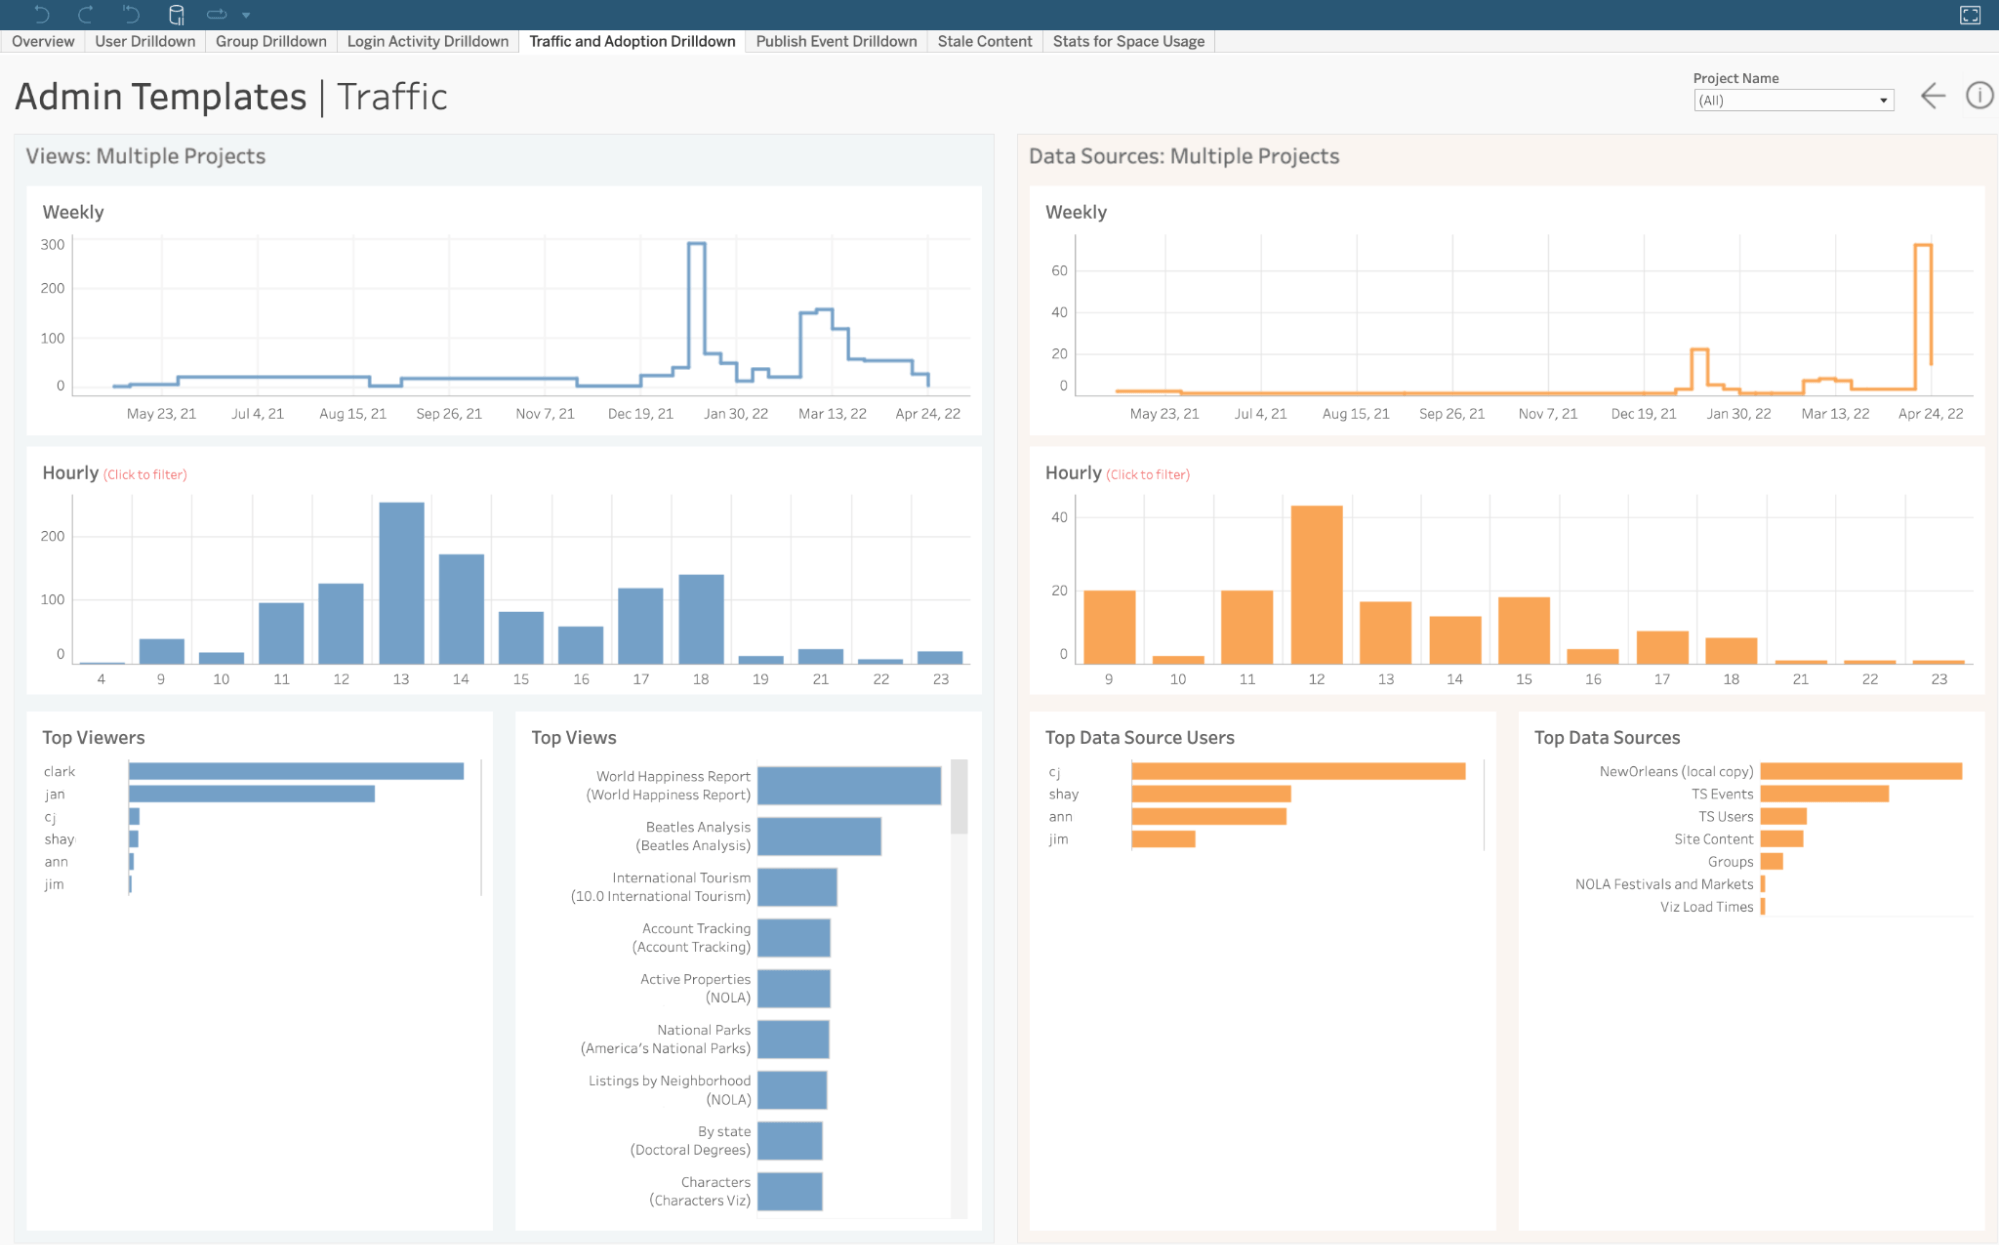 A Tableau workbook of Admin templates, showing traffic to views in a viz on the left, and traffic to data sources in a view on the right, derived from Admin Insights data.